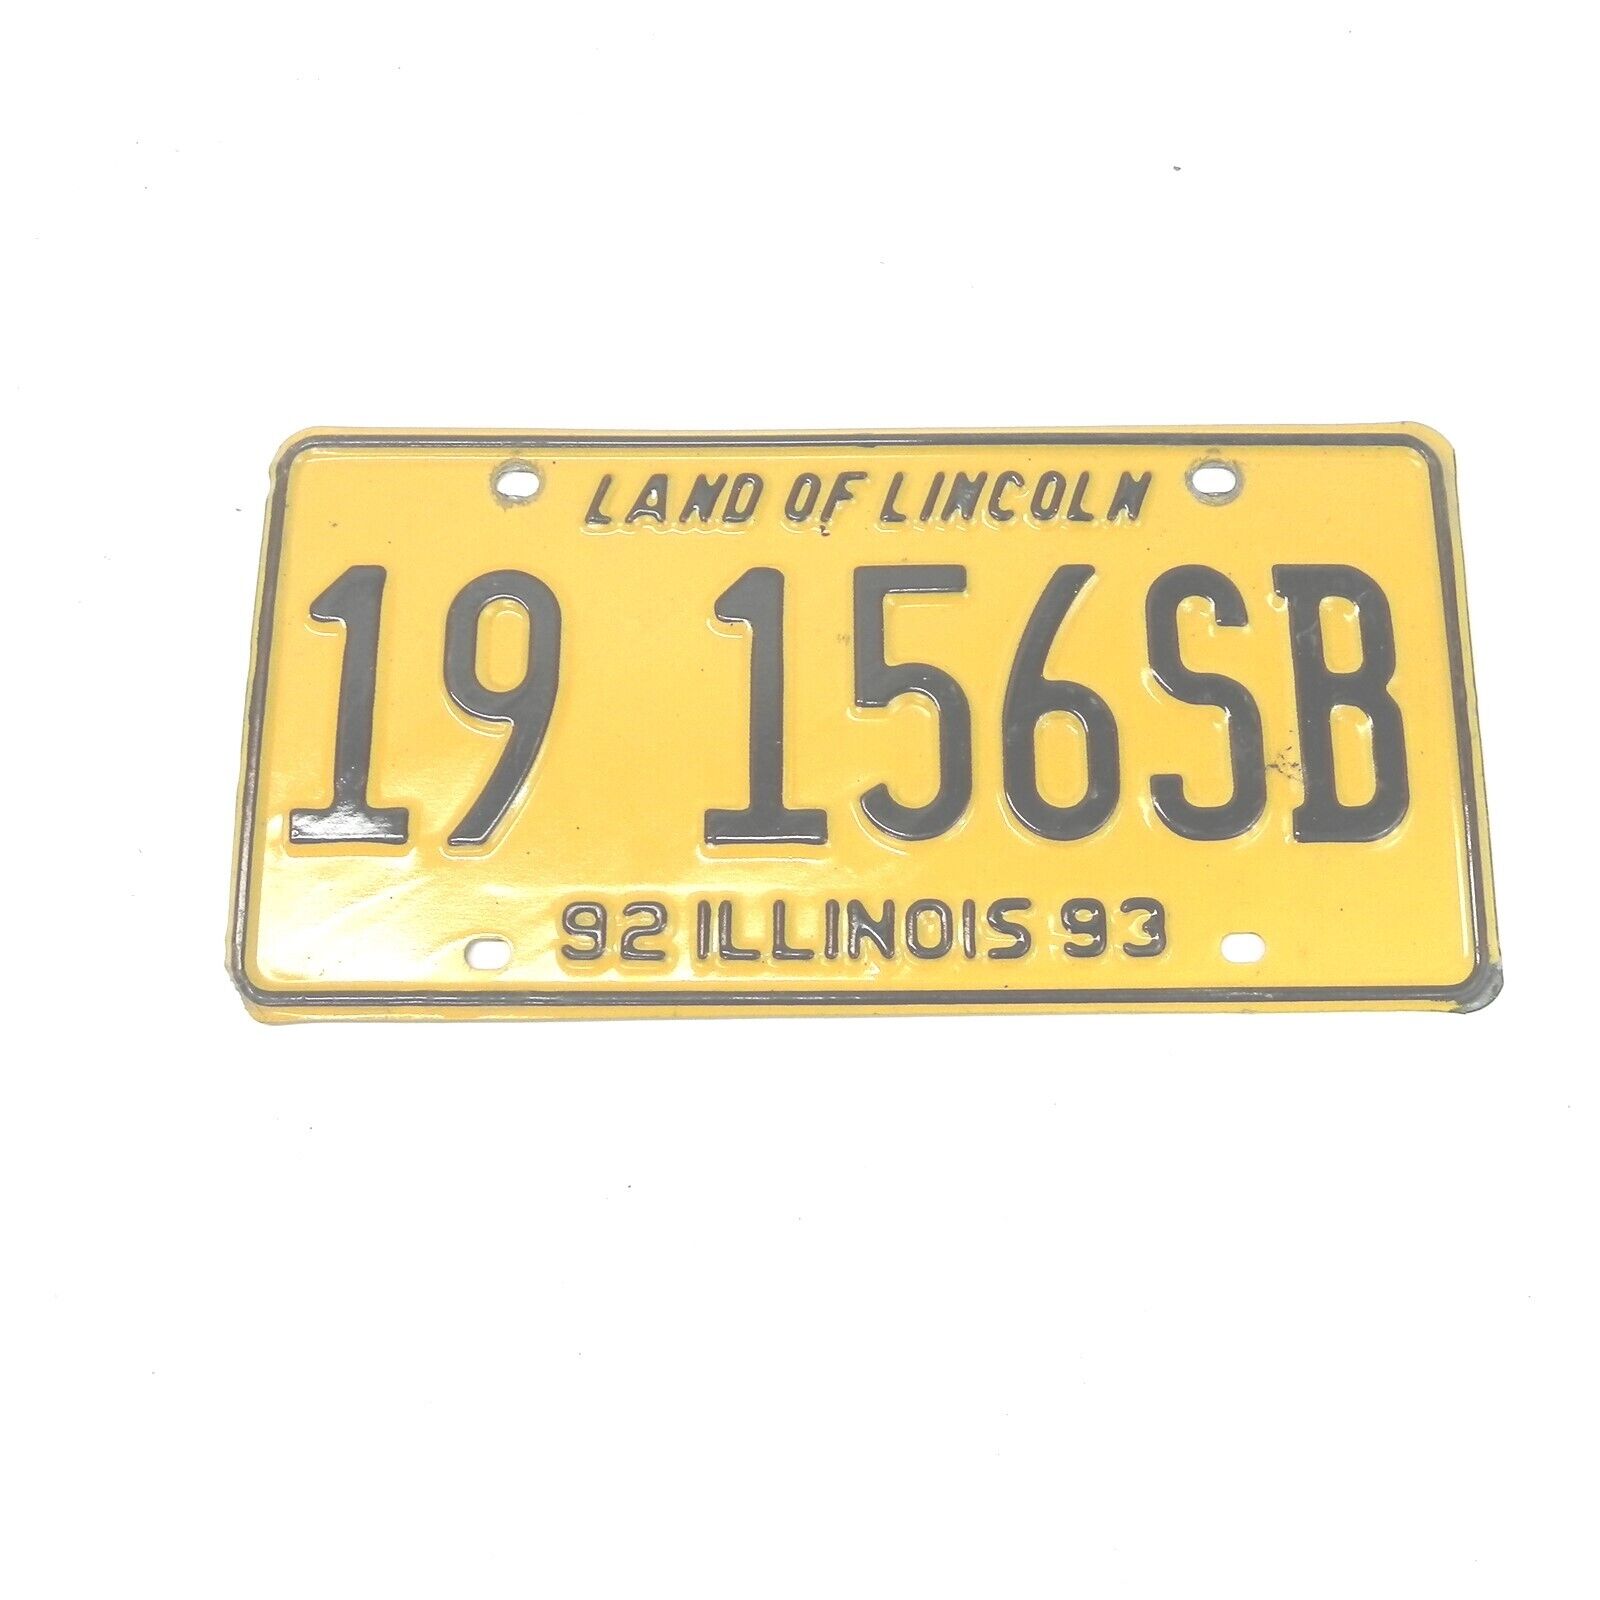 VINTAGE ILLINOIS LAND OF LINCOLN LICENSE PLATE 19156SB YELLOW AND BLACK NO TAGS